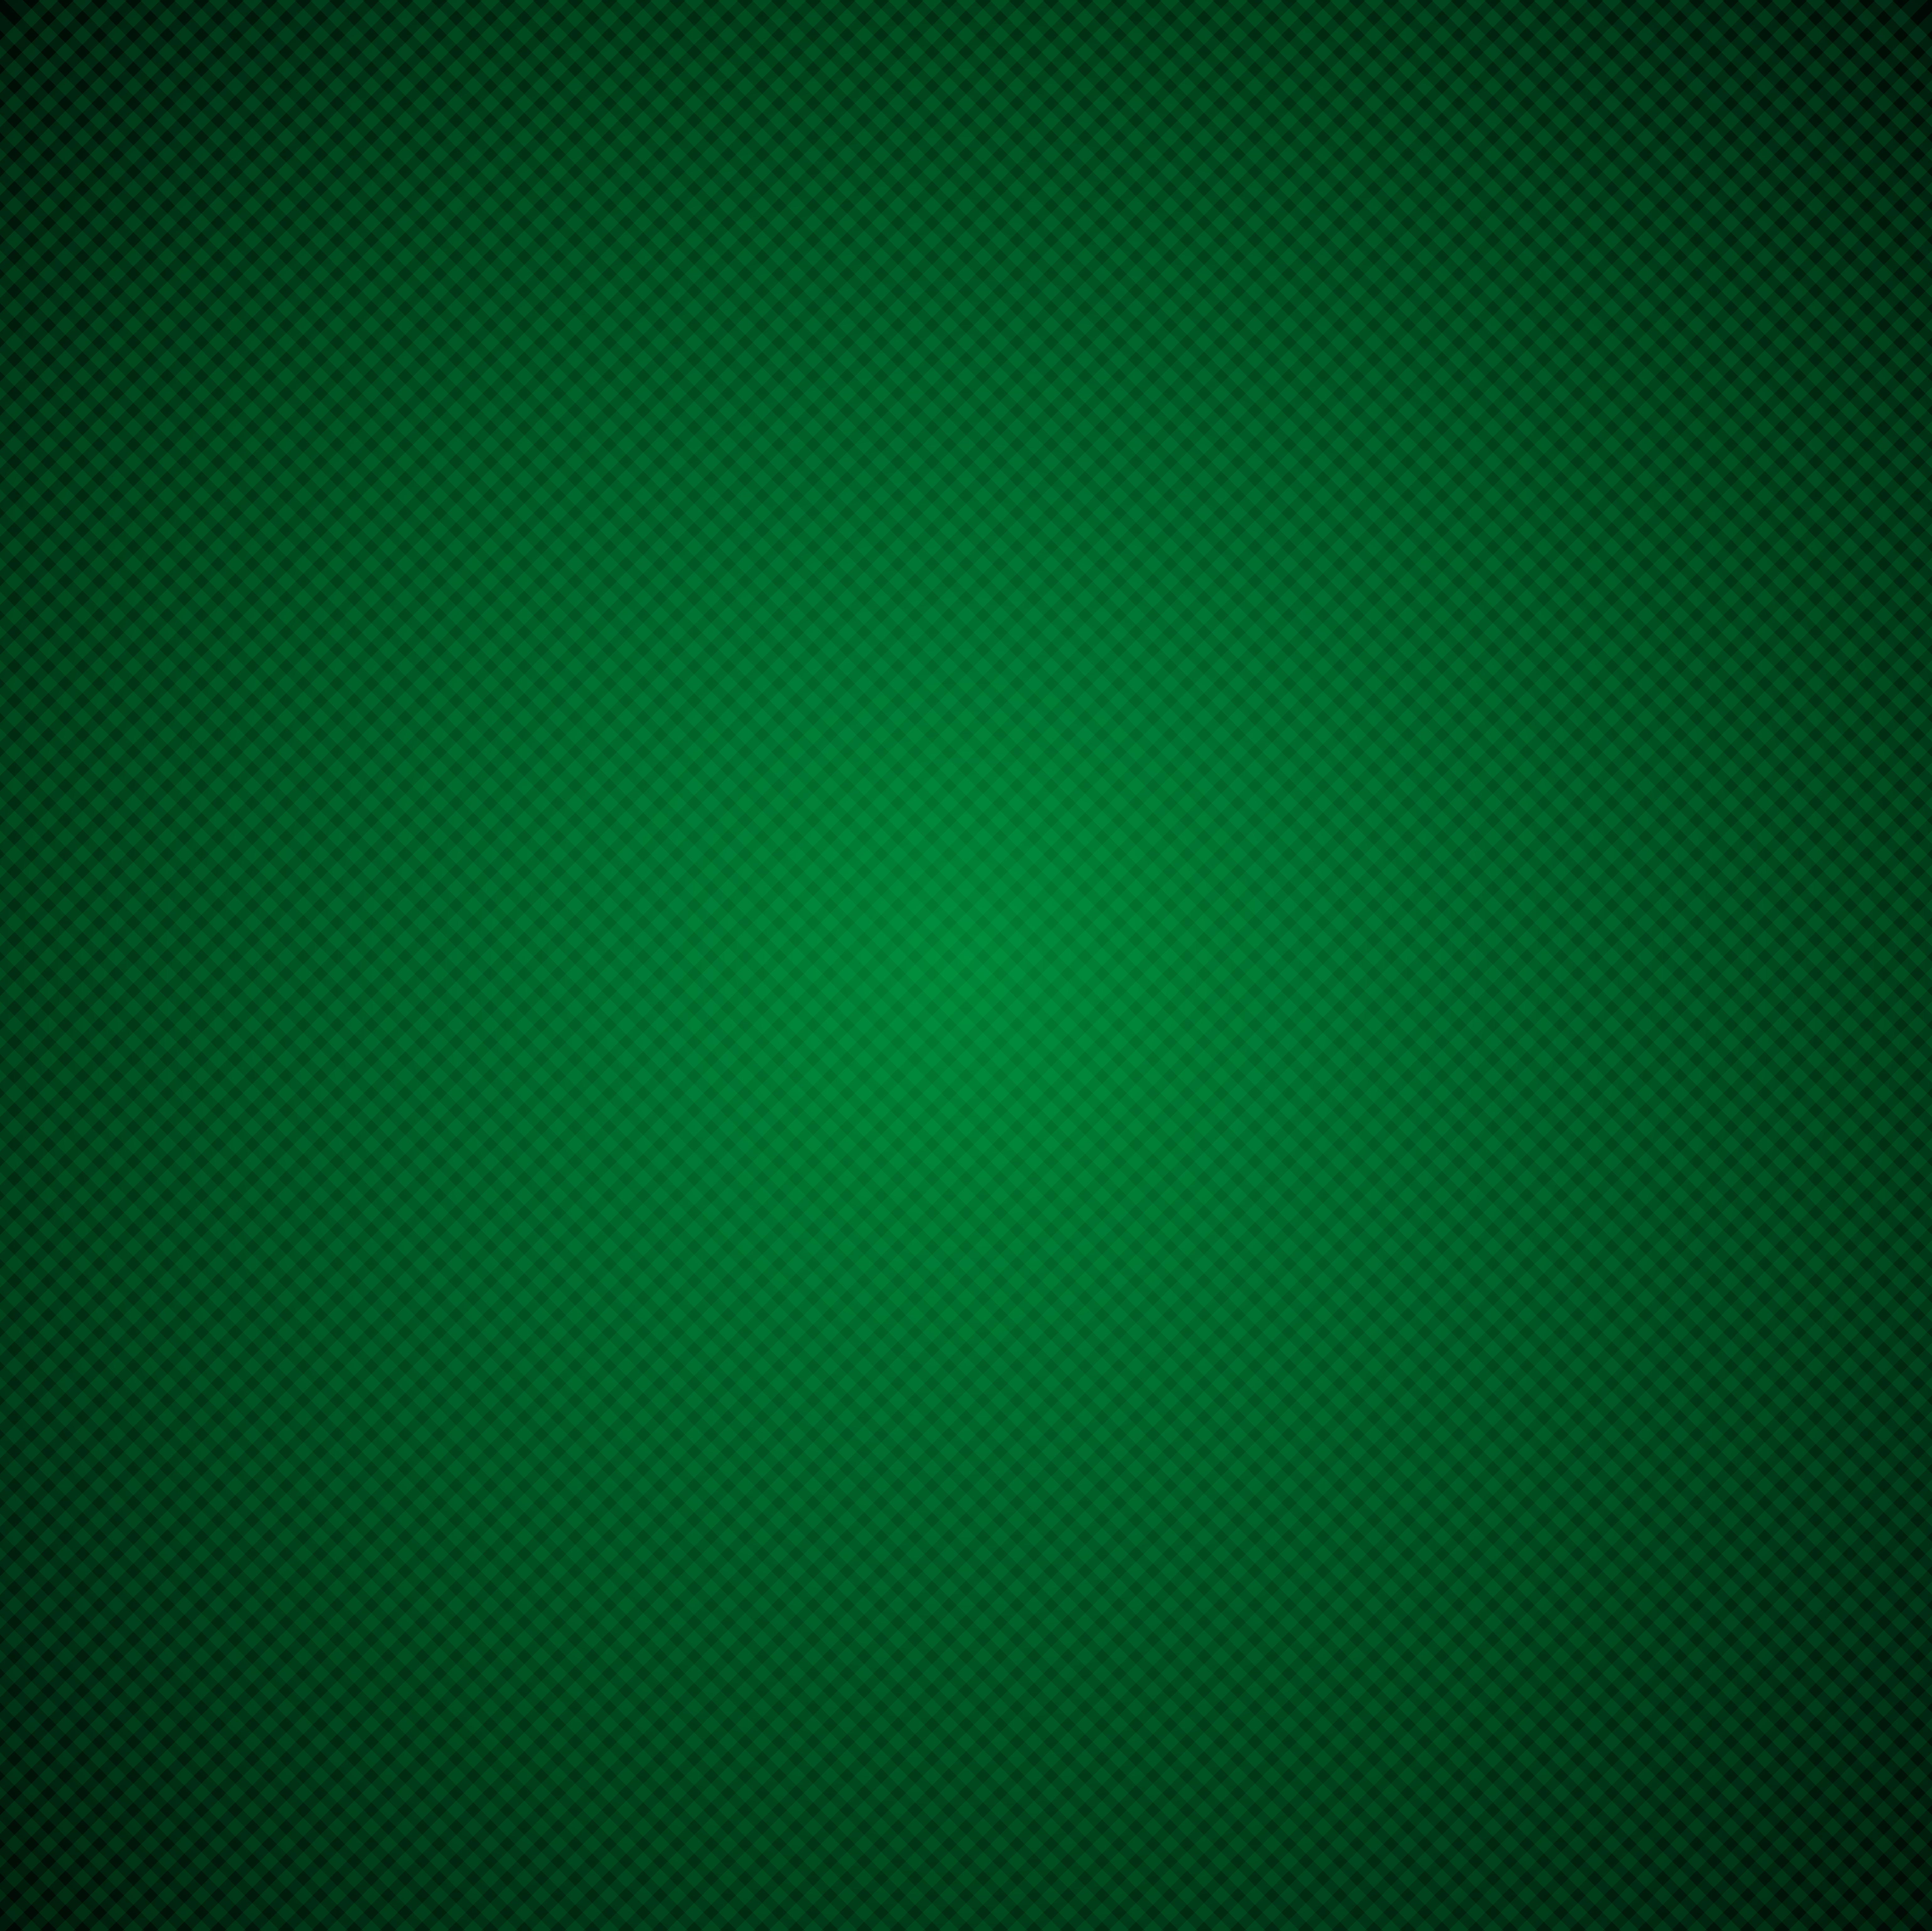 Green Teams Background